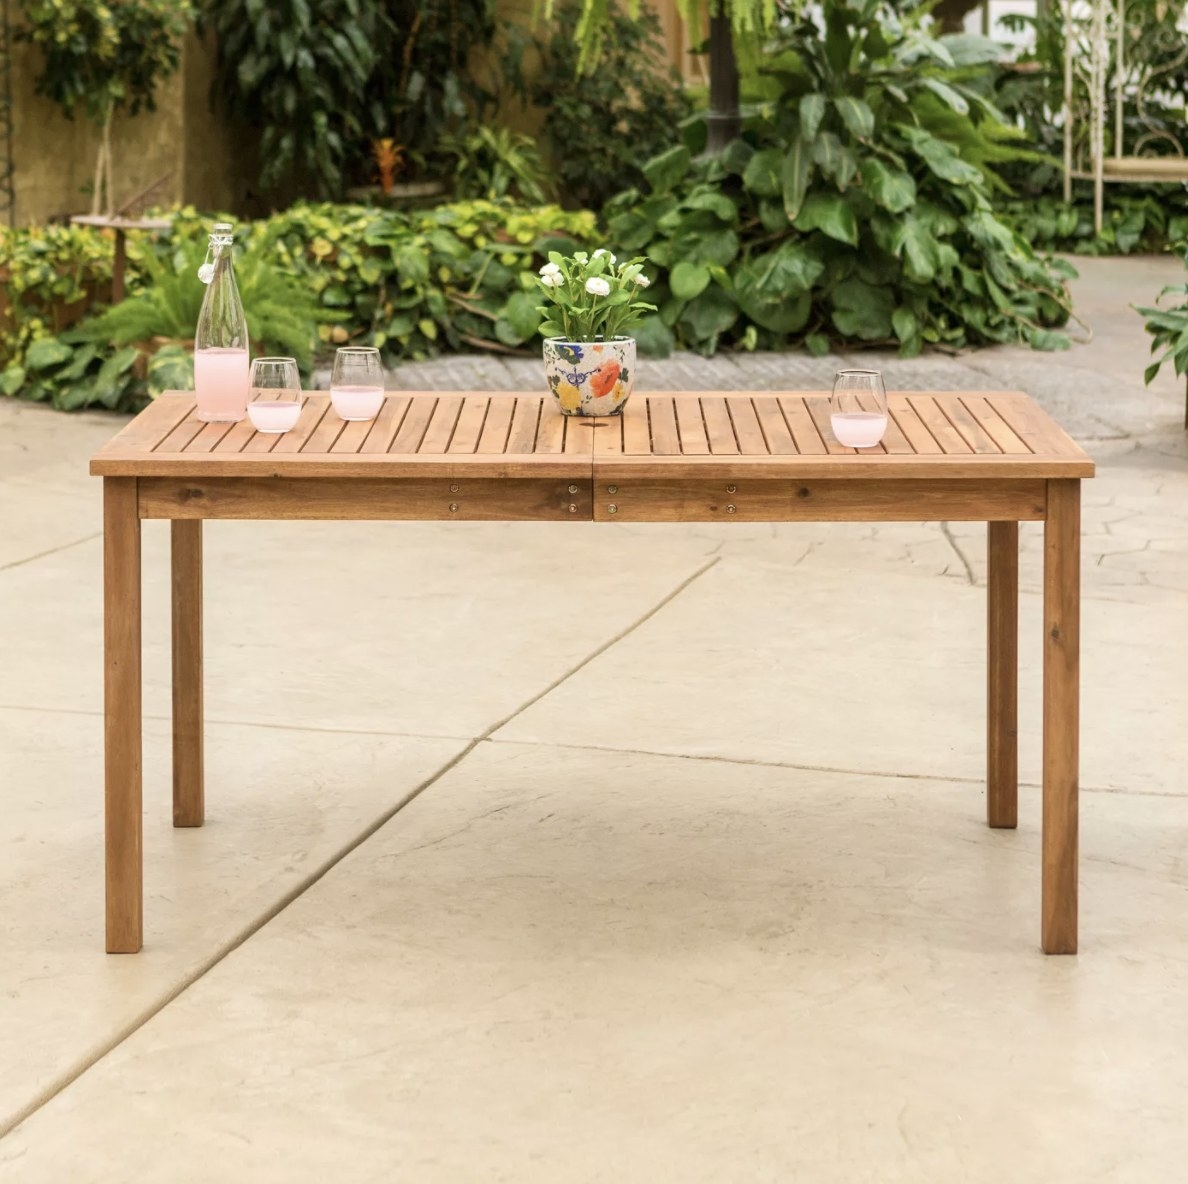 A long light brown table with a slatted top in a lush outdoor setting